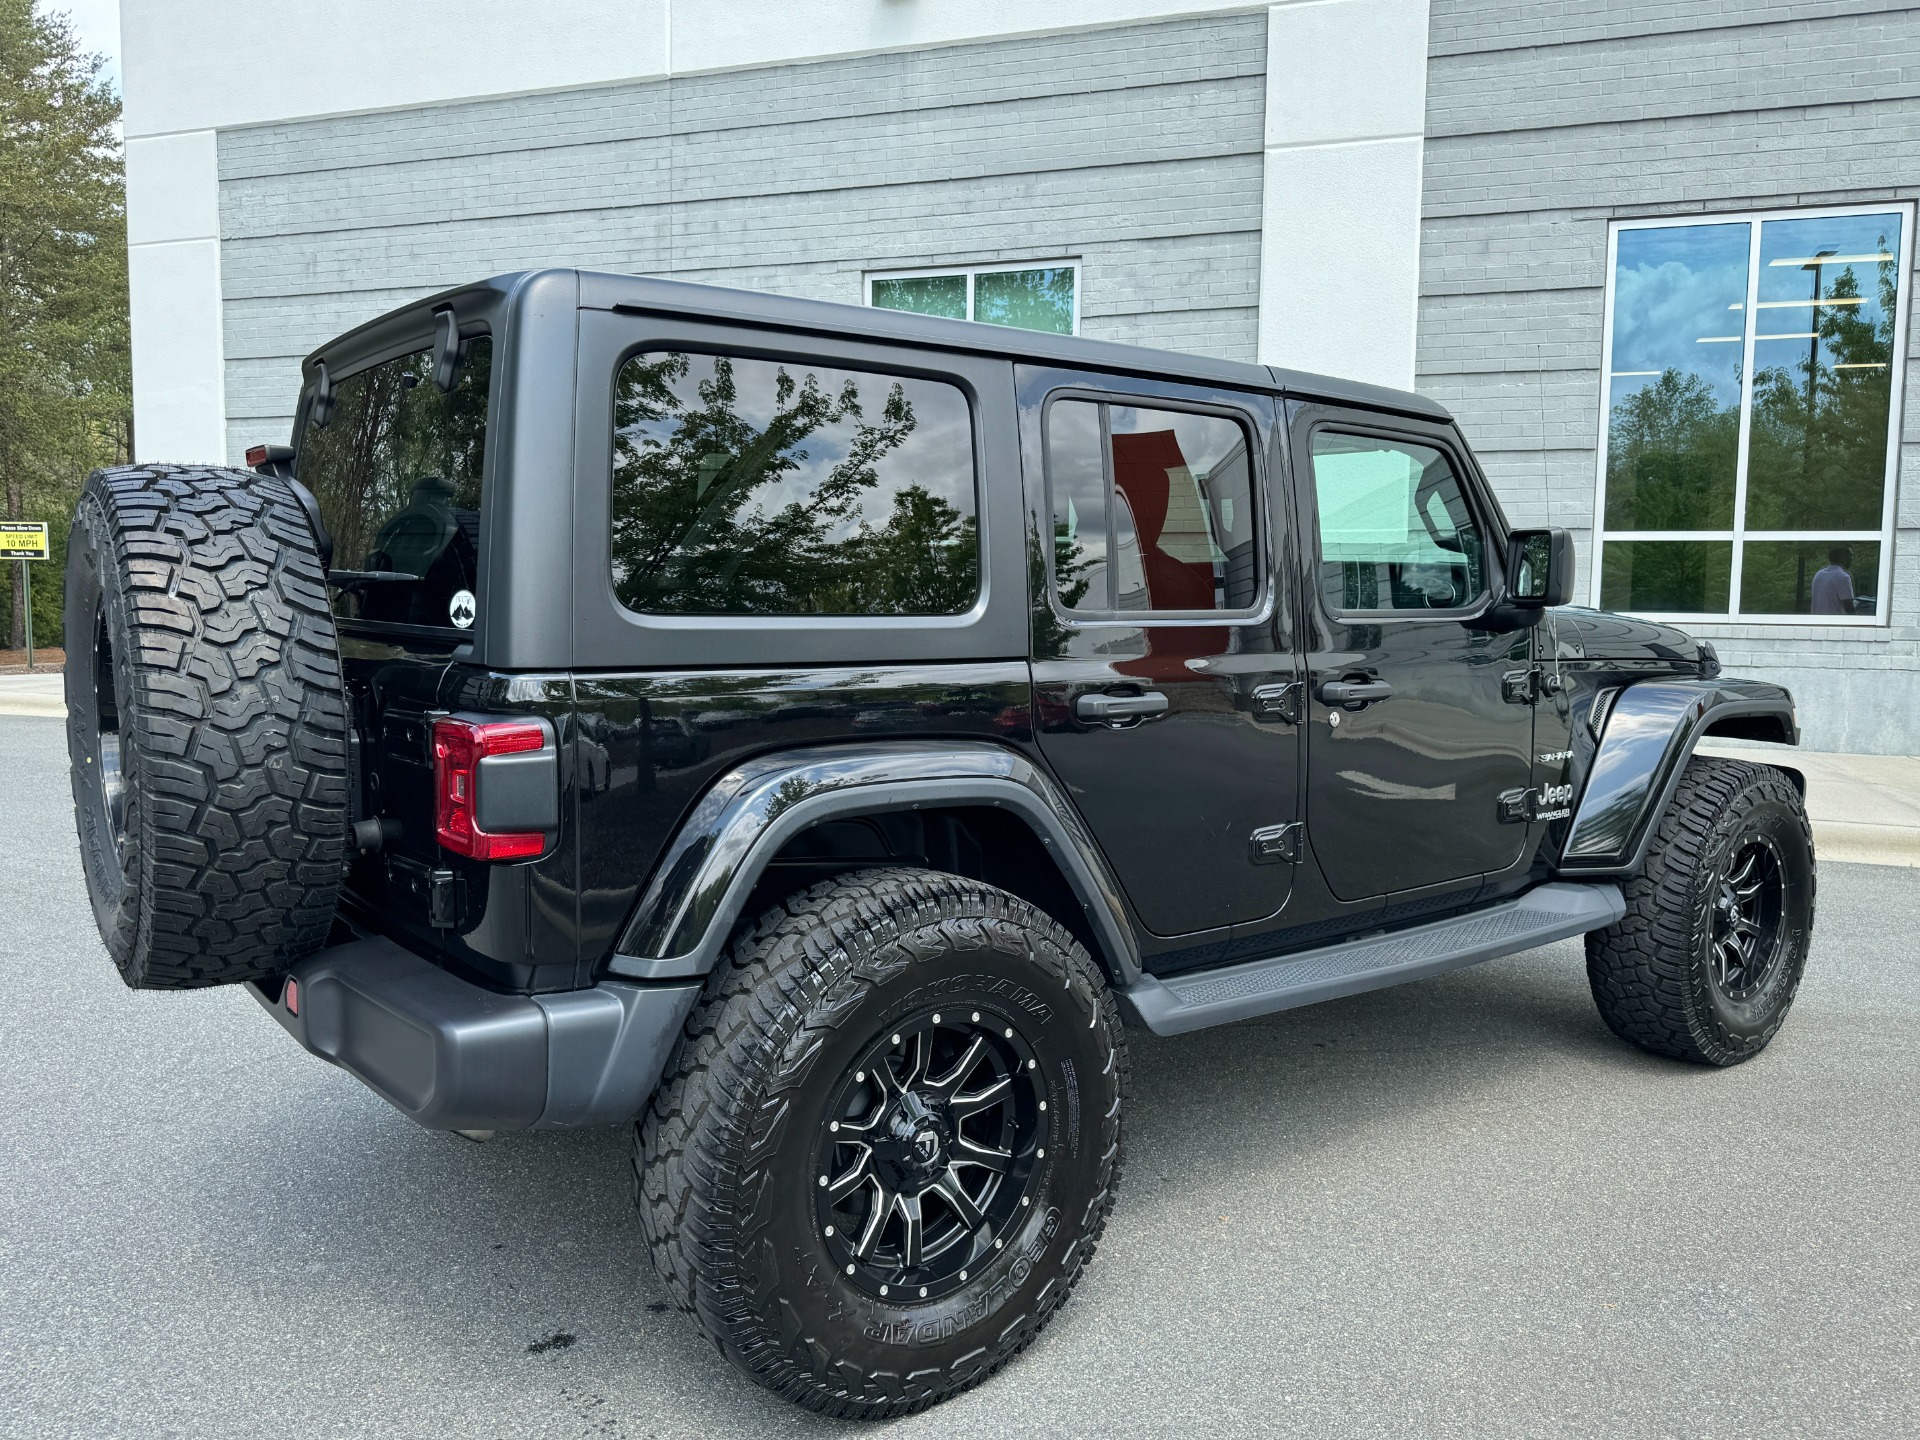 Used 2018 Jeep WRANGLER UNLIMITED SAHARA 4X4 / MANUAL / NAV / ALPINE / FREEDOM TOP / REARVIEW for sale Sold at Formula Imports in Charlotte NC 28227 12